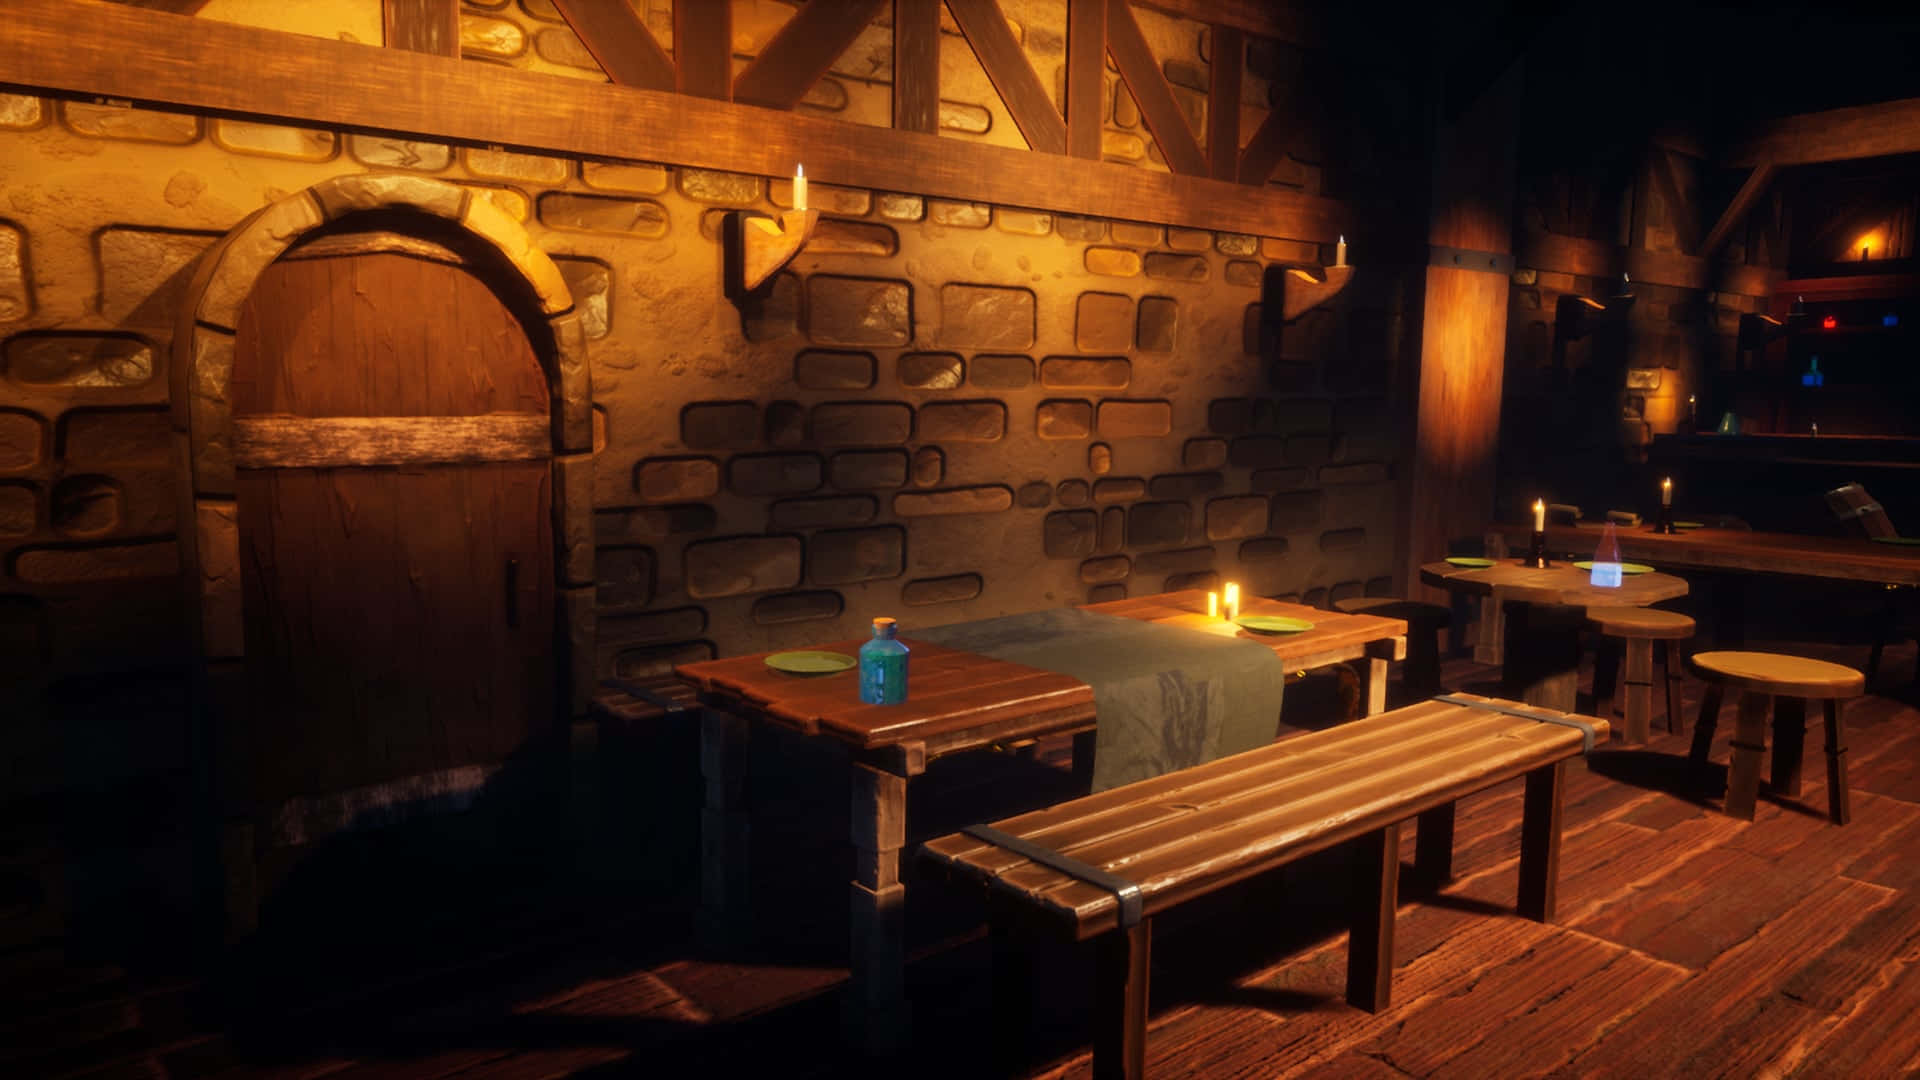 Enjoy a warm, cozy atmosphere at your favorite tavern